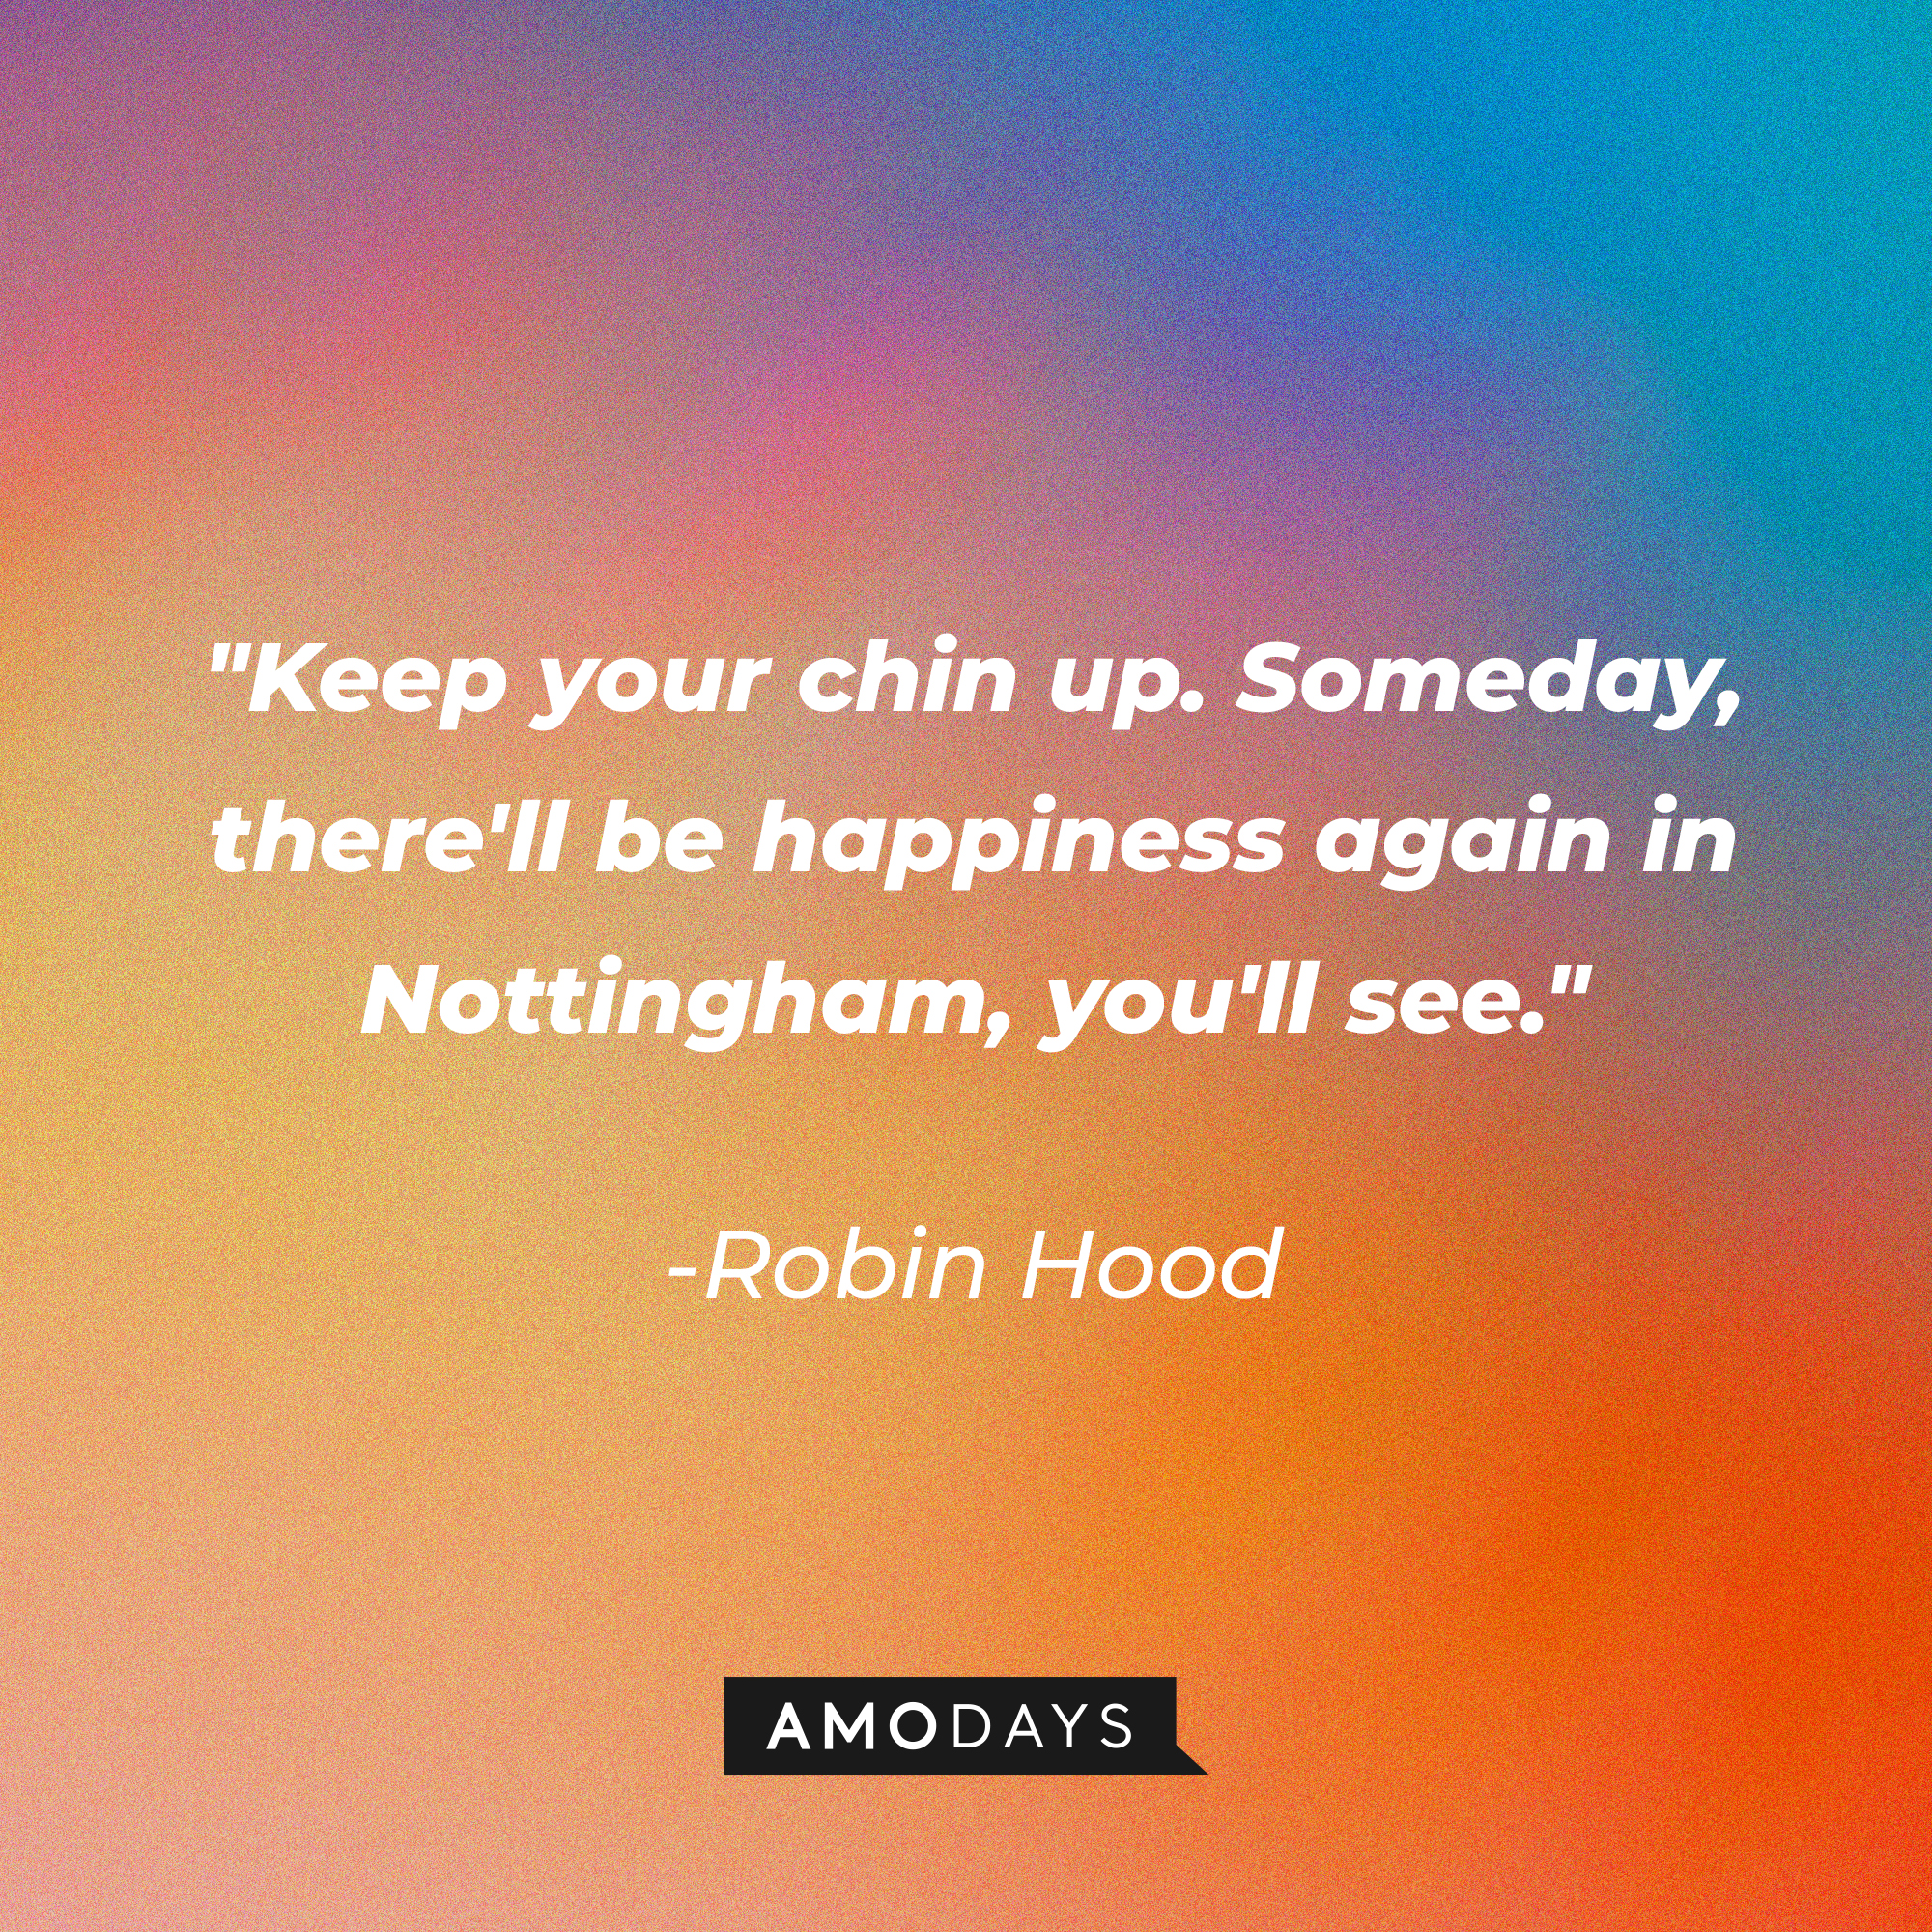 Robin Hood's quote: "Keep your chin up. Someday, there'll be happiness again in Nottingham, you'll see." | Source: Amodays